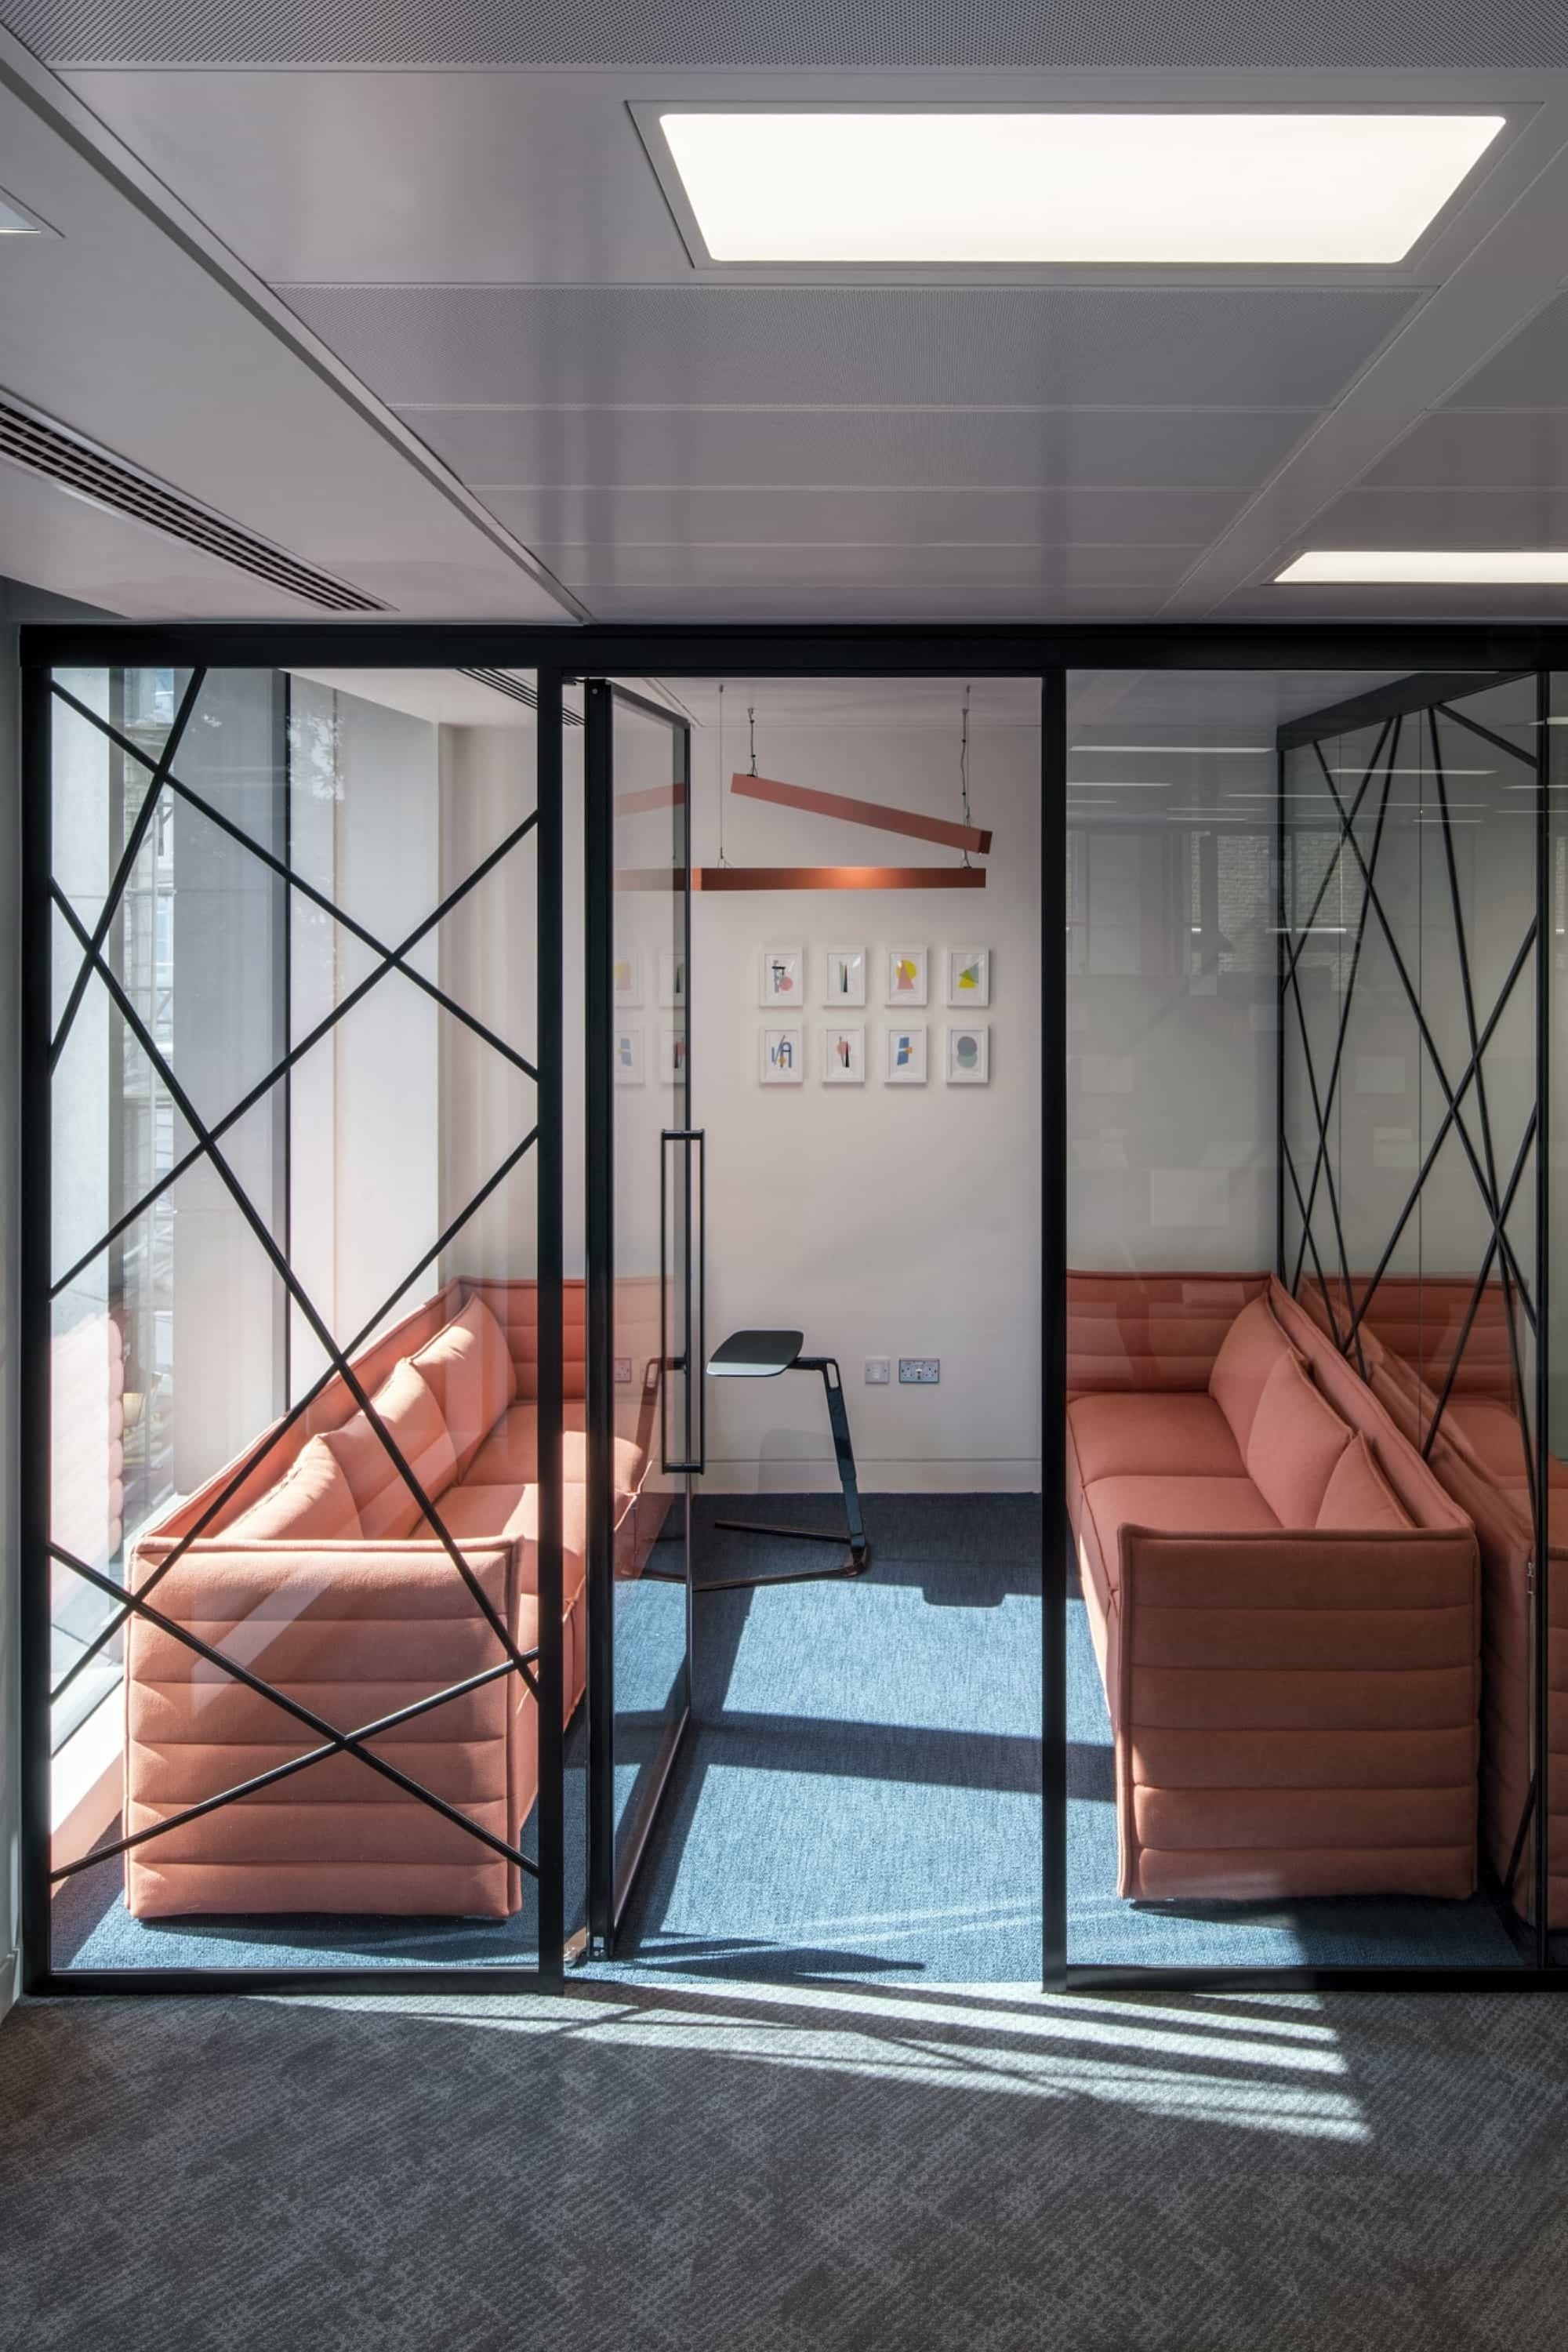 Breakout area in office fit out for collaboration